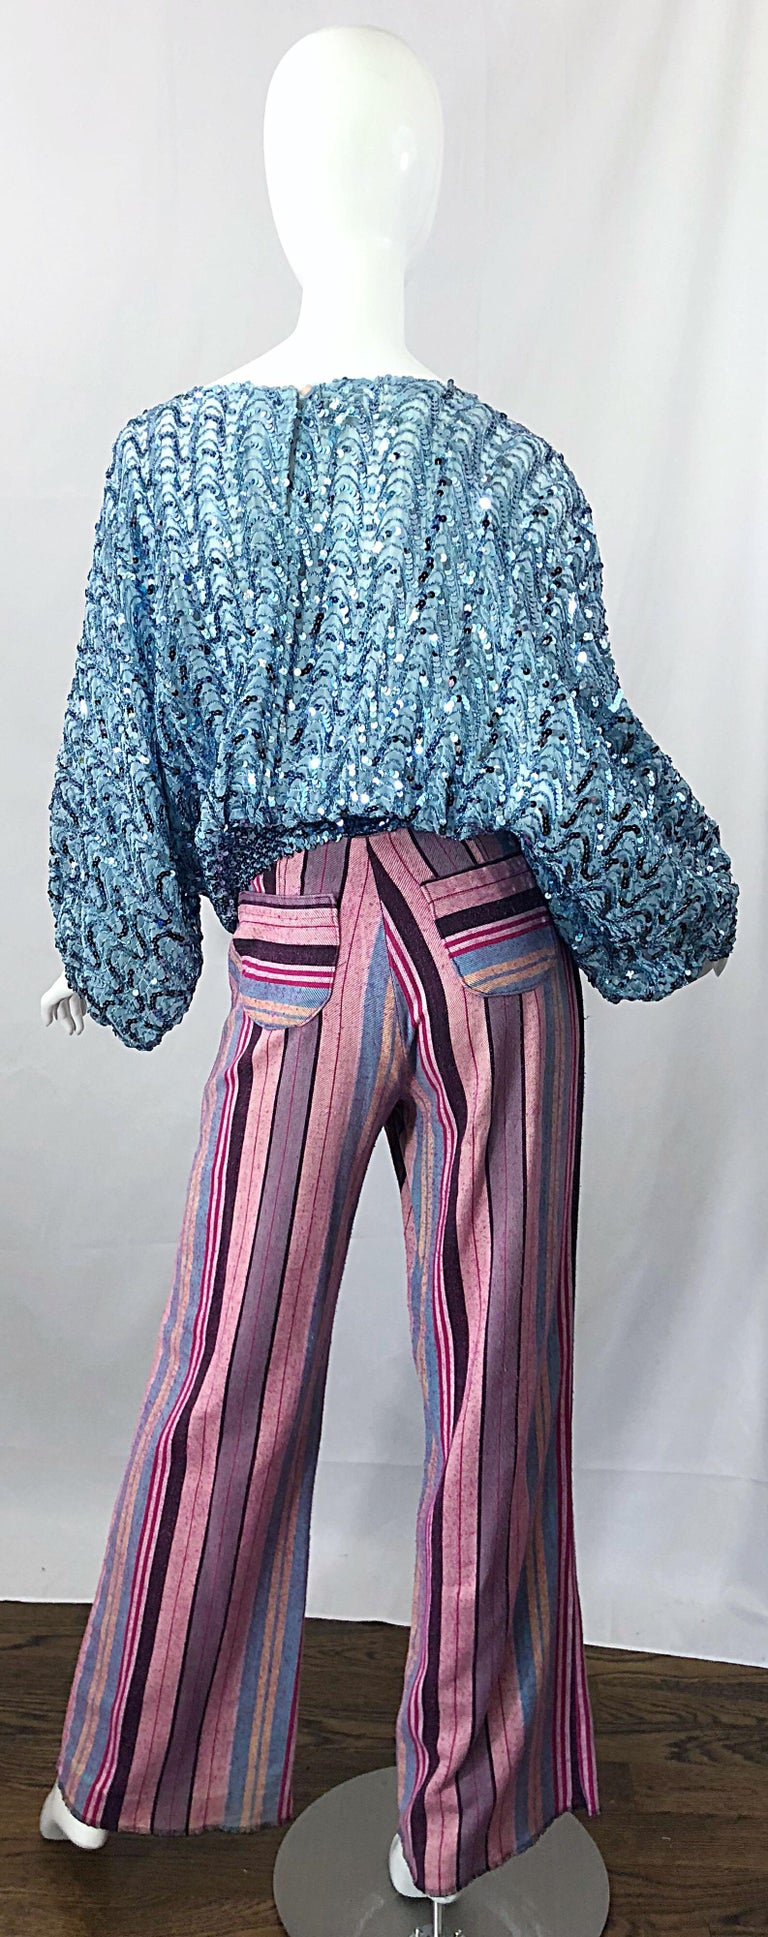 Gray Fabulous 1970s High Waisted Pink + Blue Striped Vintage 70s Bell Bottoms Pants For Sale